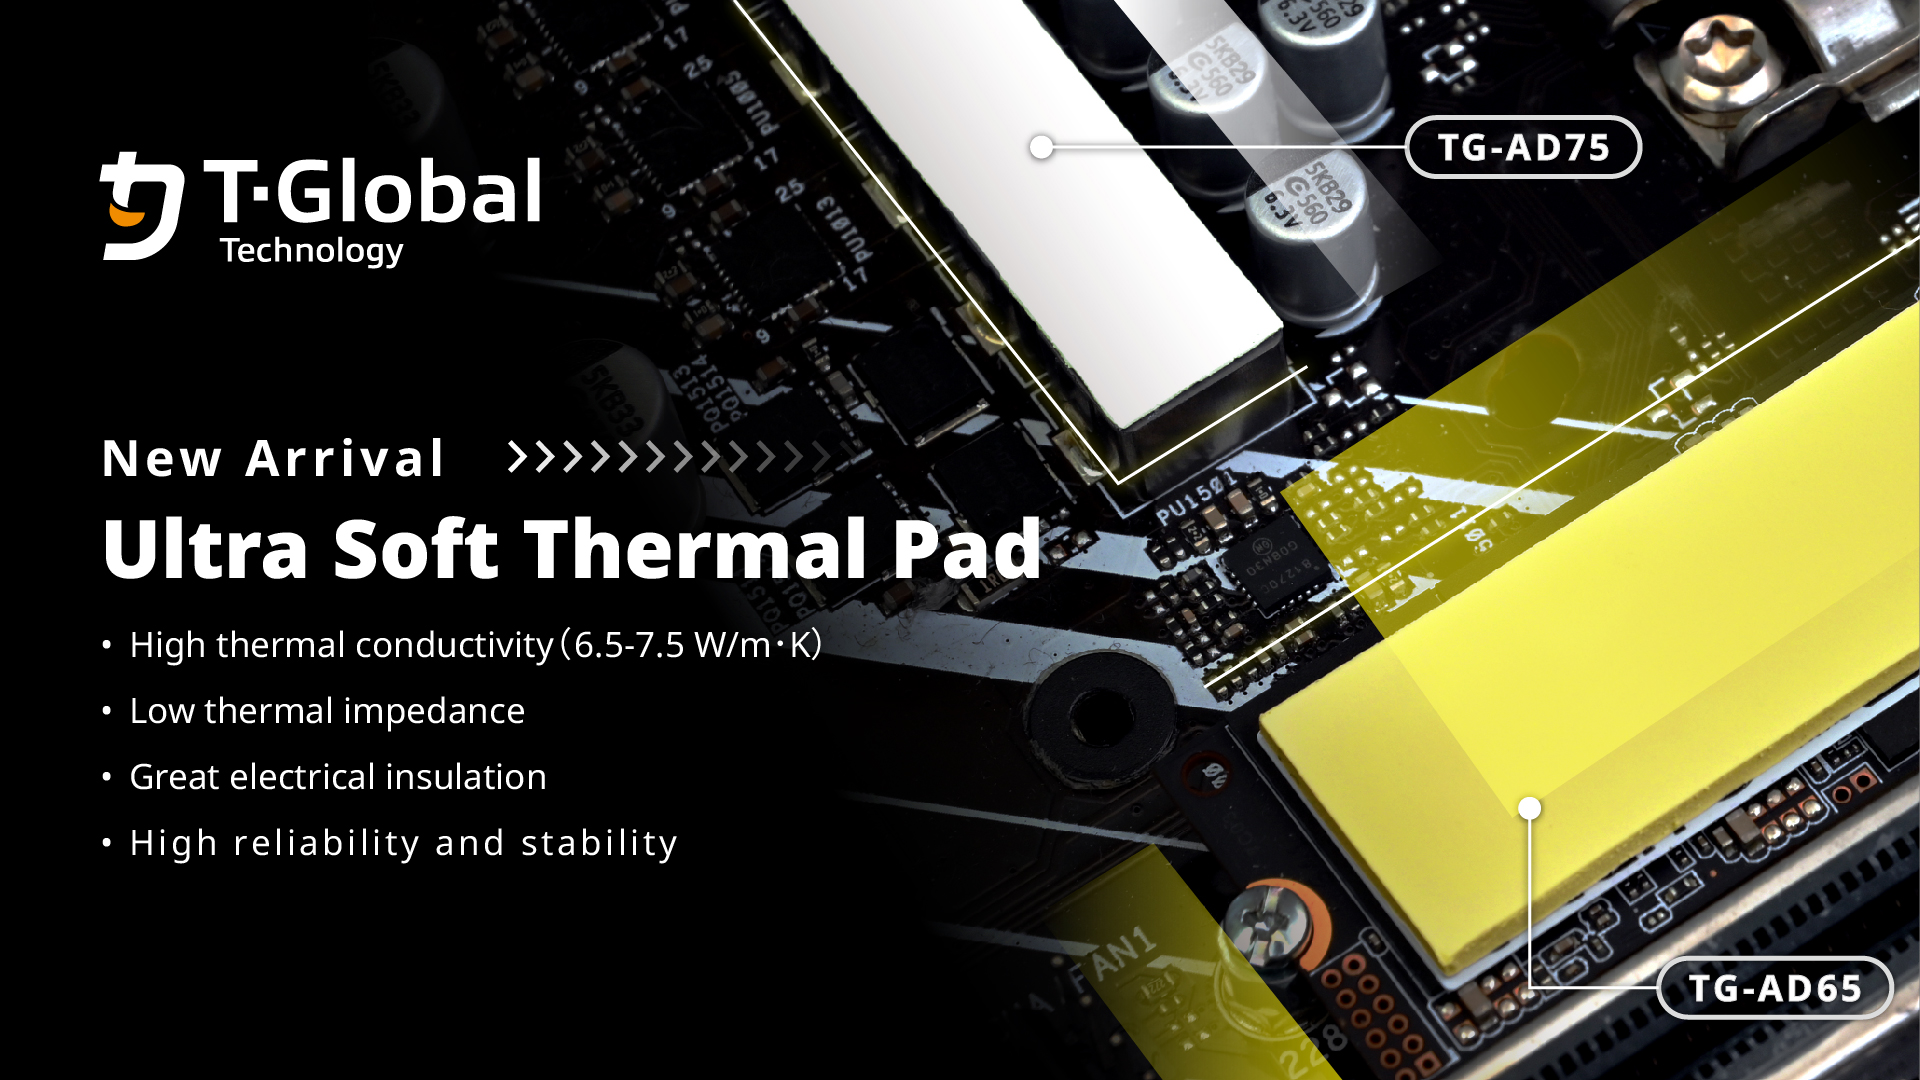 Two New Ultra-Soft High Conductivity Thermal Pads Have Gone to Market